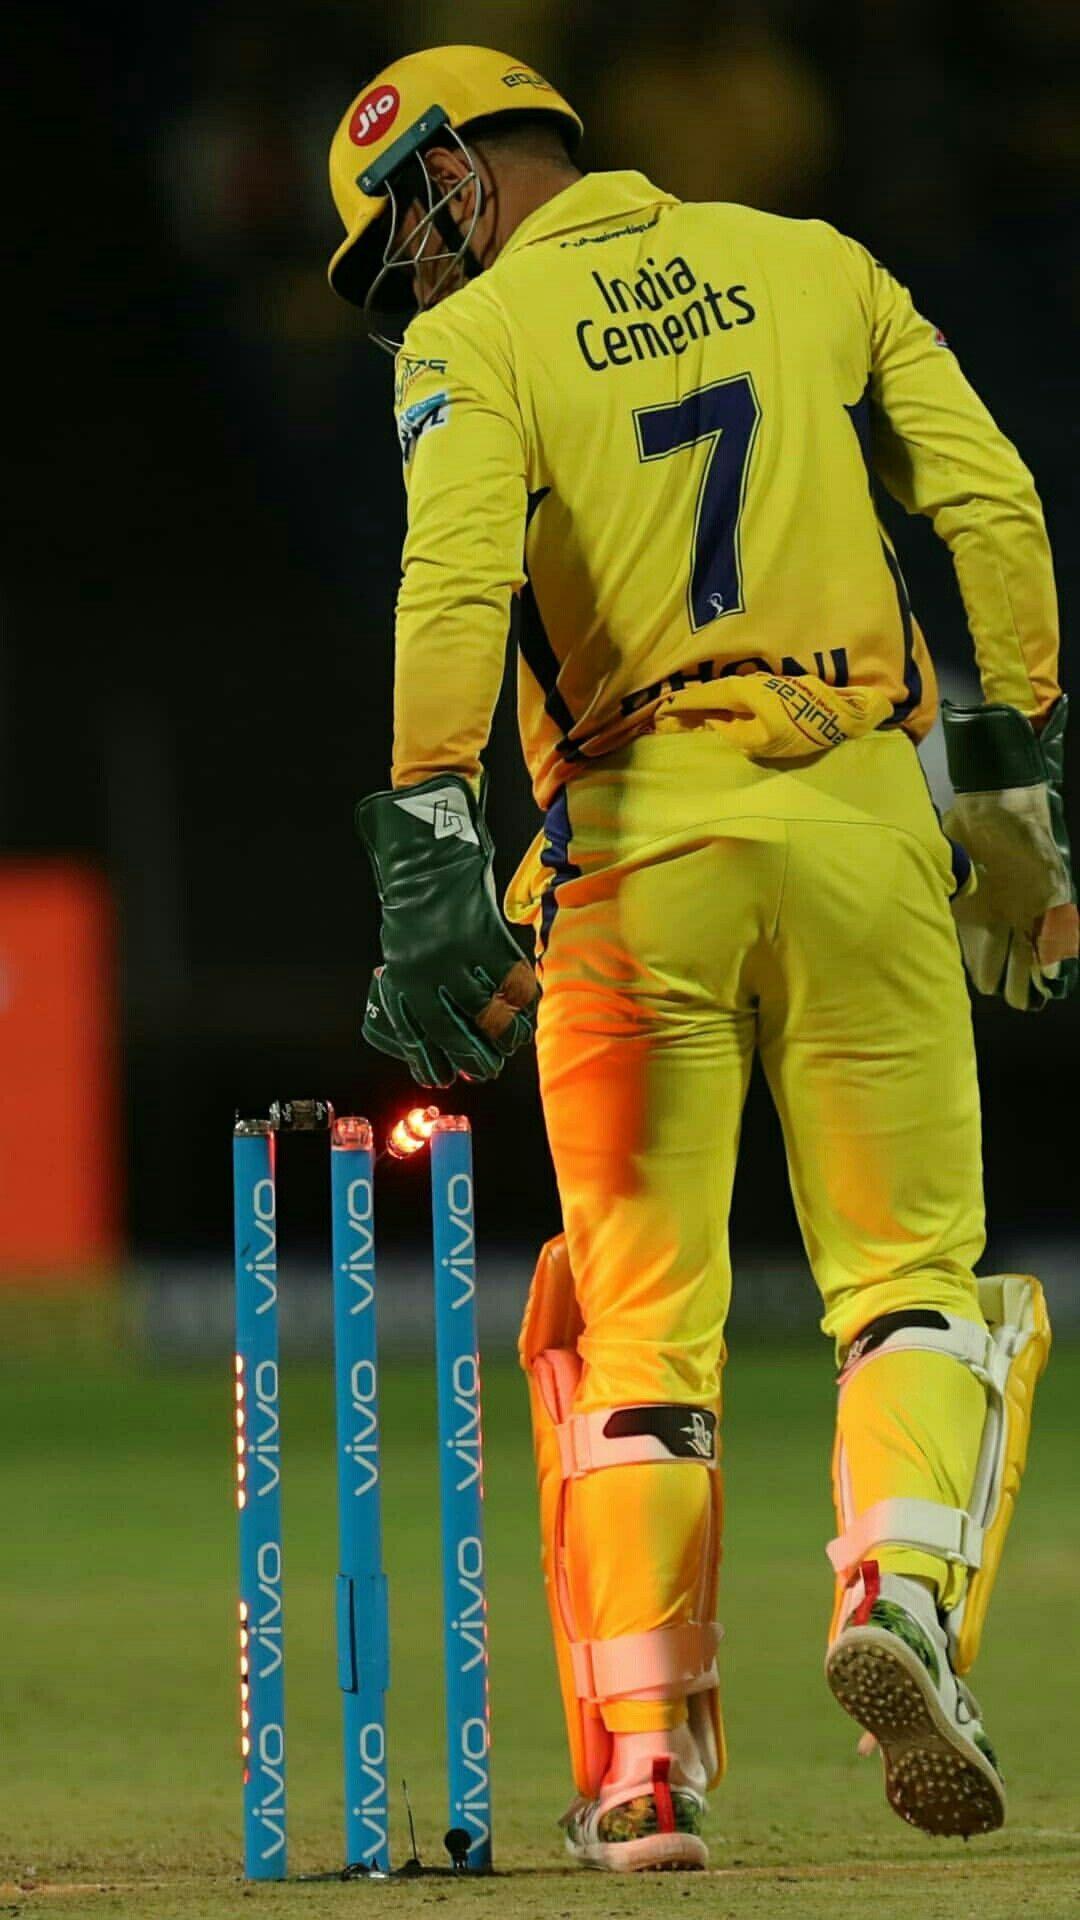 msd in csk jersey hd images